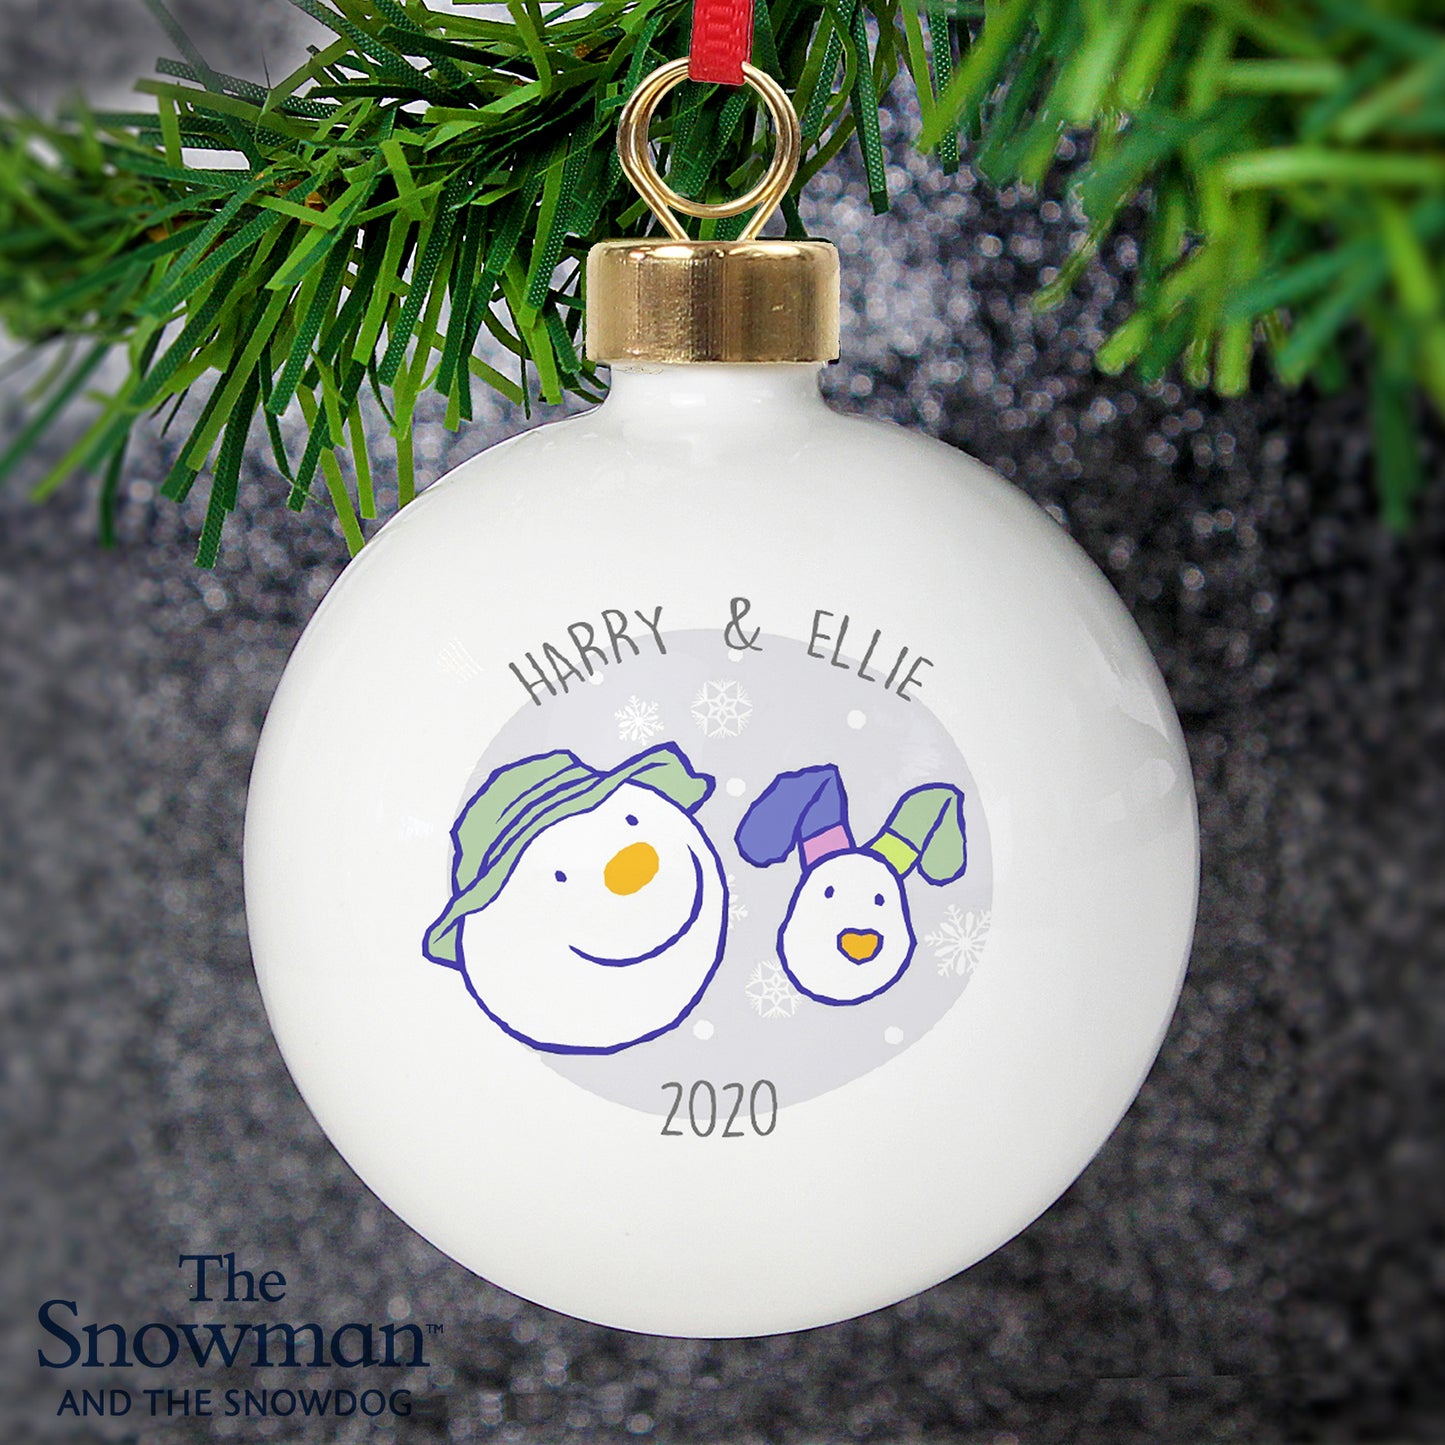 Personalised The Snowman and the Snowdog Bauble